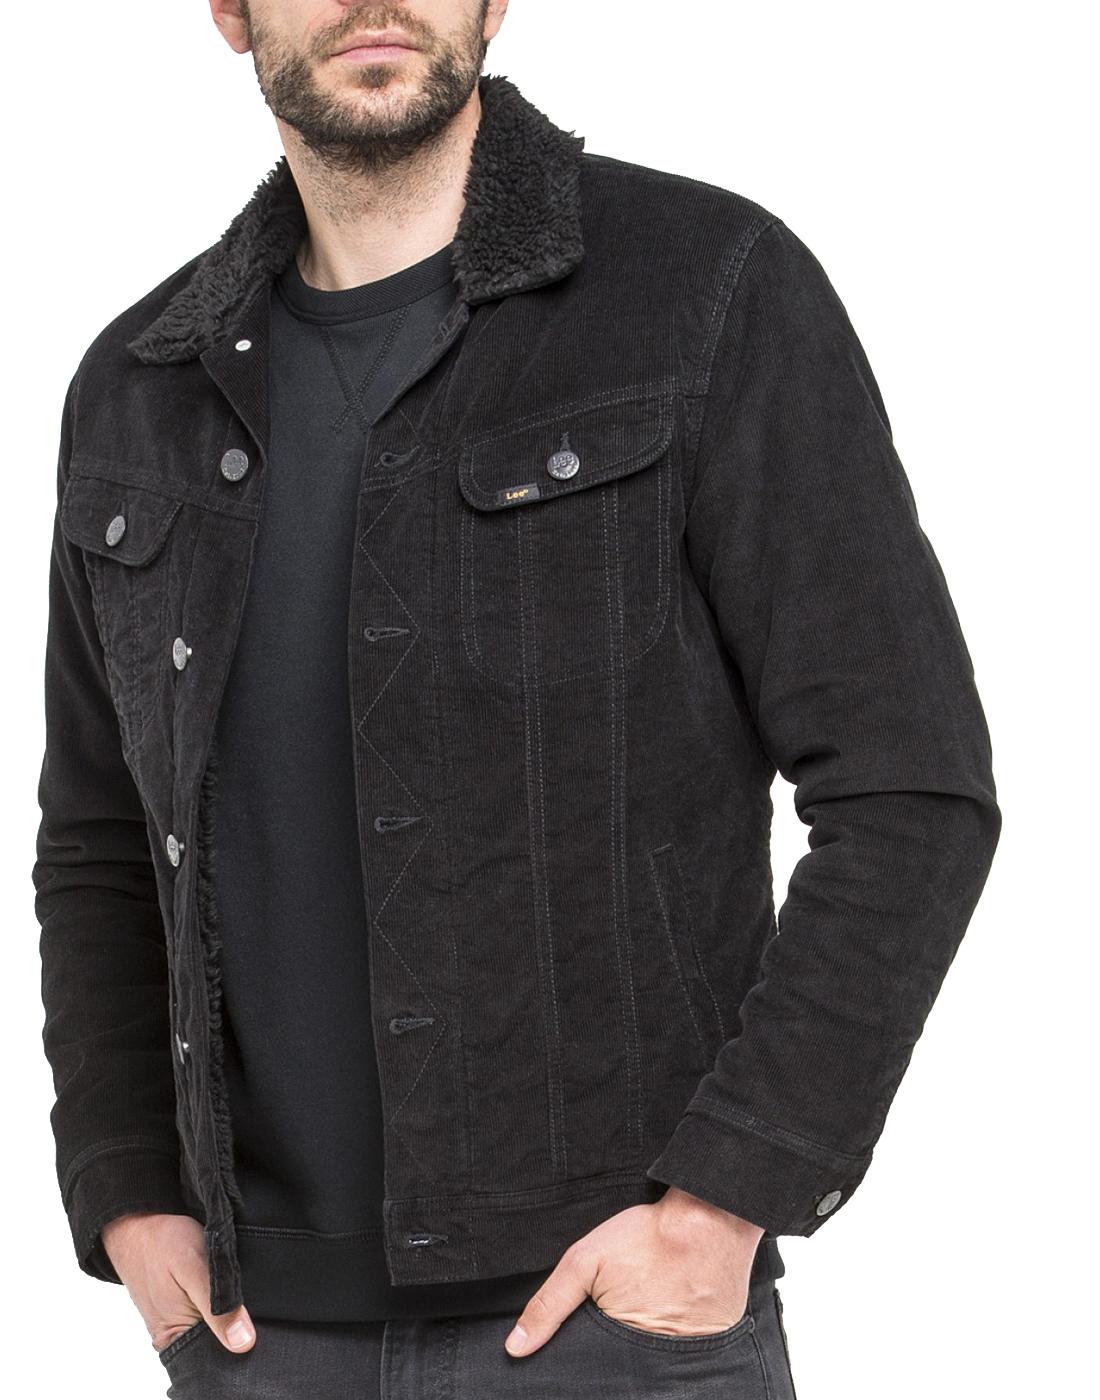 LEE JEANS Sherpa Collar Rider Cord 